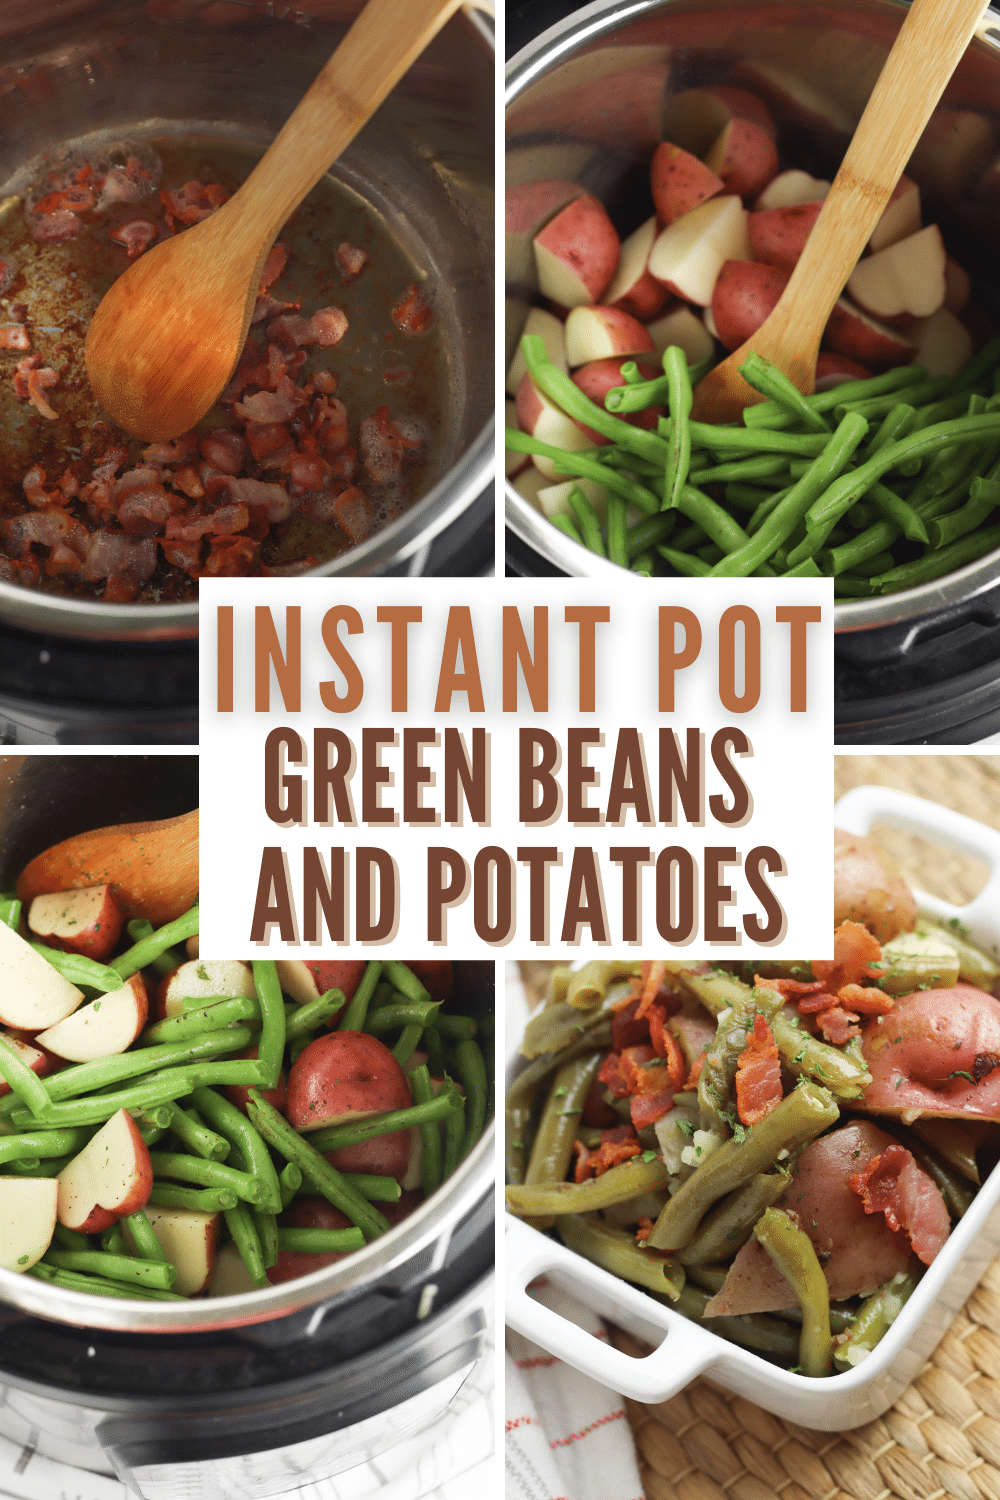 Instant Pot Green Beans and Potatoes are a delicious and healthy side dish perfect for a weeknight meal. It's ready in just 30 minutes. #instantpot #pressurecooker #greenbeans #potatoes #recipe via @wondermomwannab